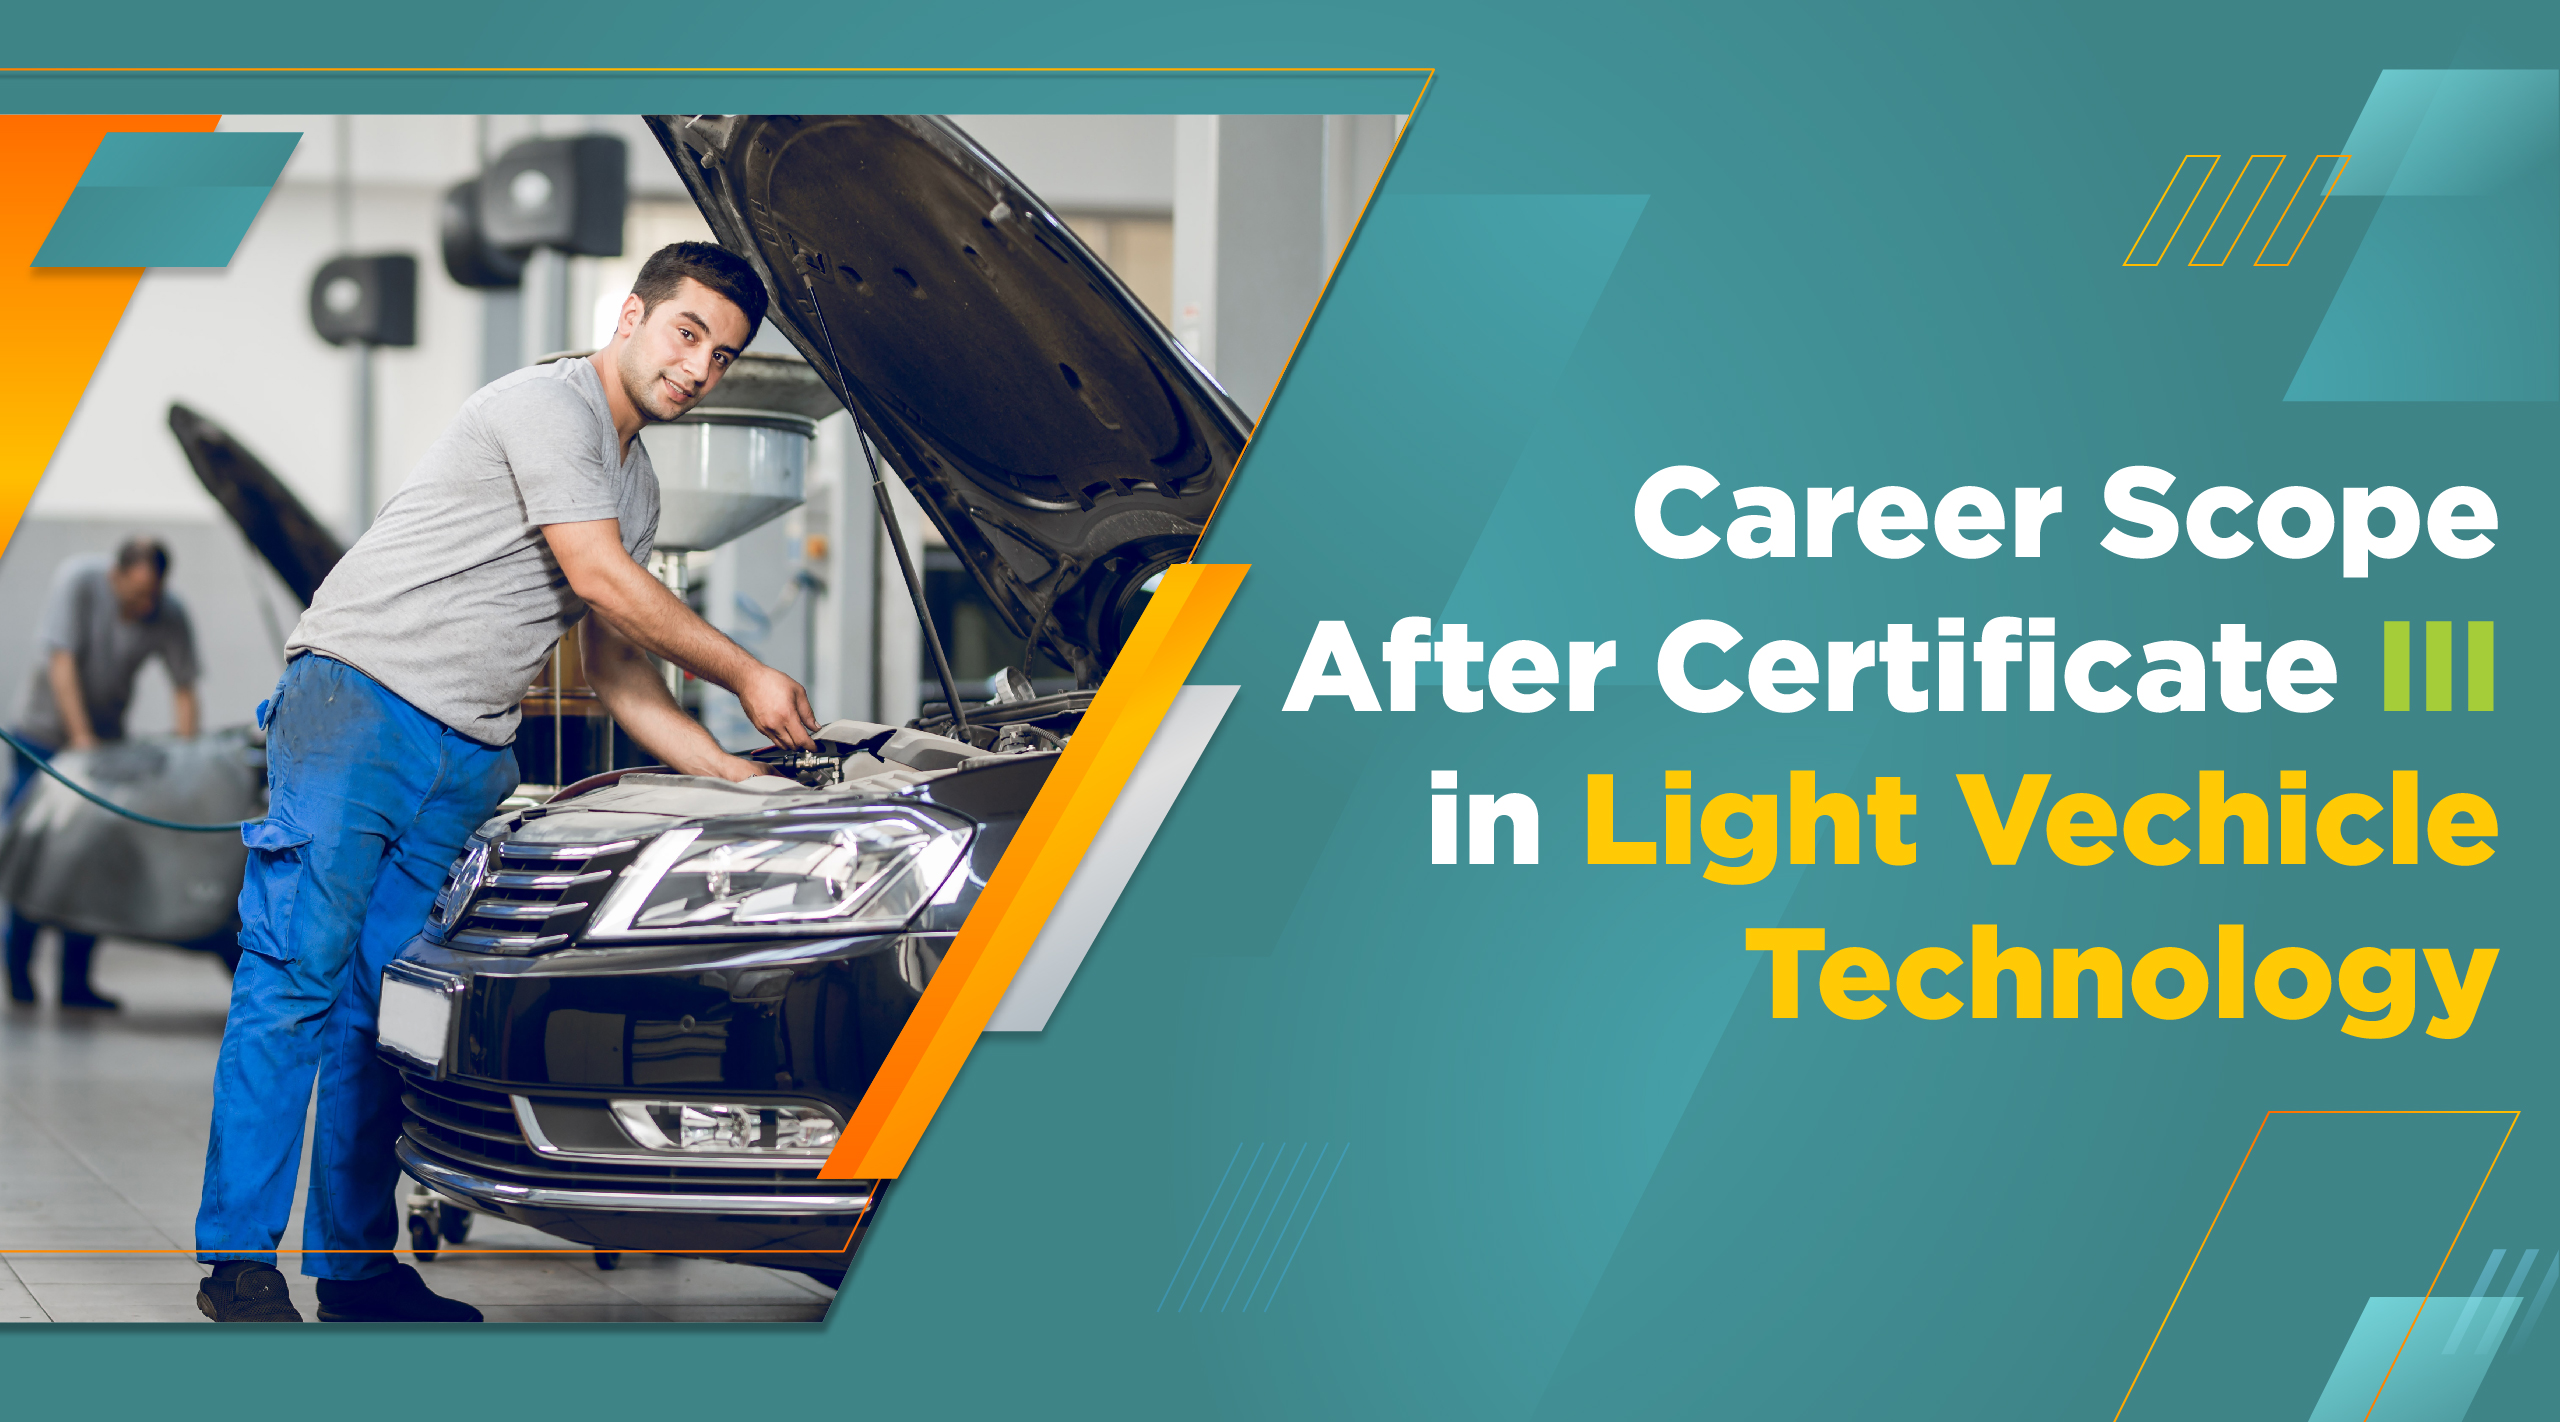 Career Scope After Certificate III in Light Vehicle Technology